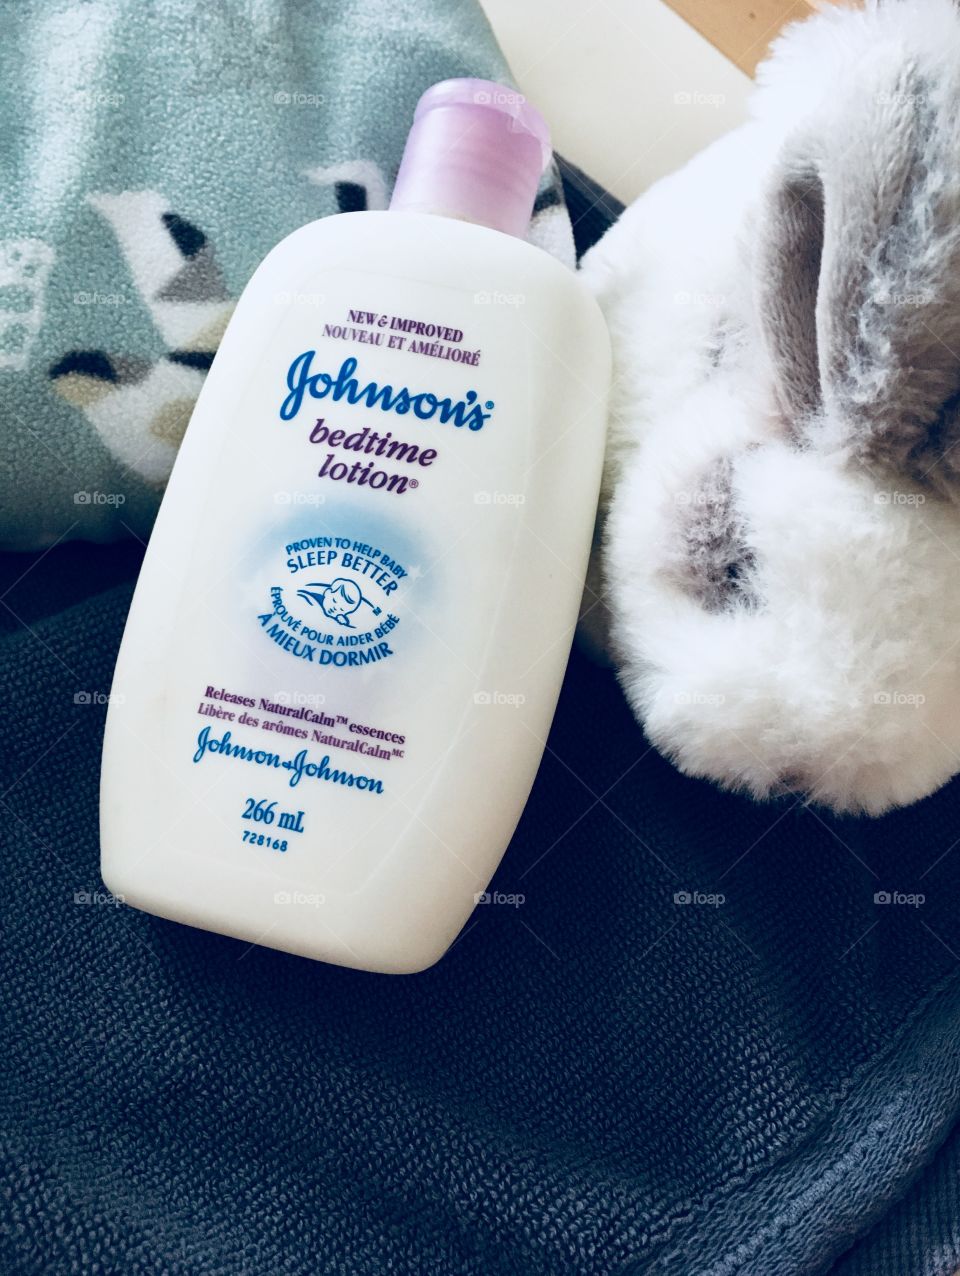 Time to get baby ready for bed. Johnson’s bedtime lotion, stuffed white and grey bunny. 